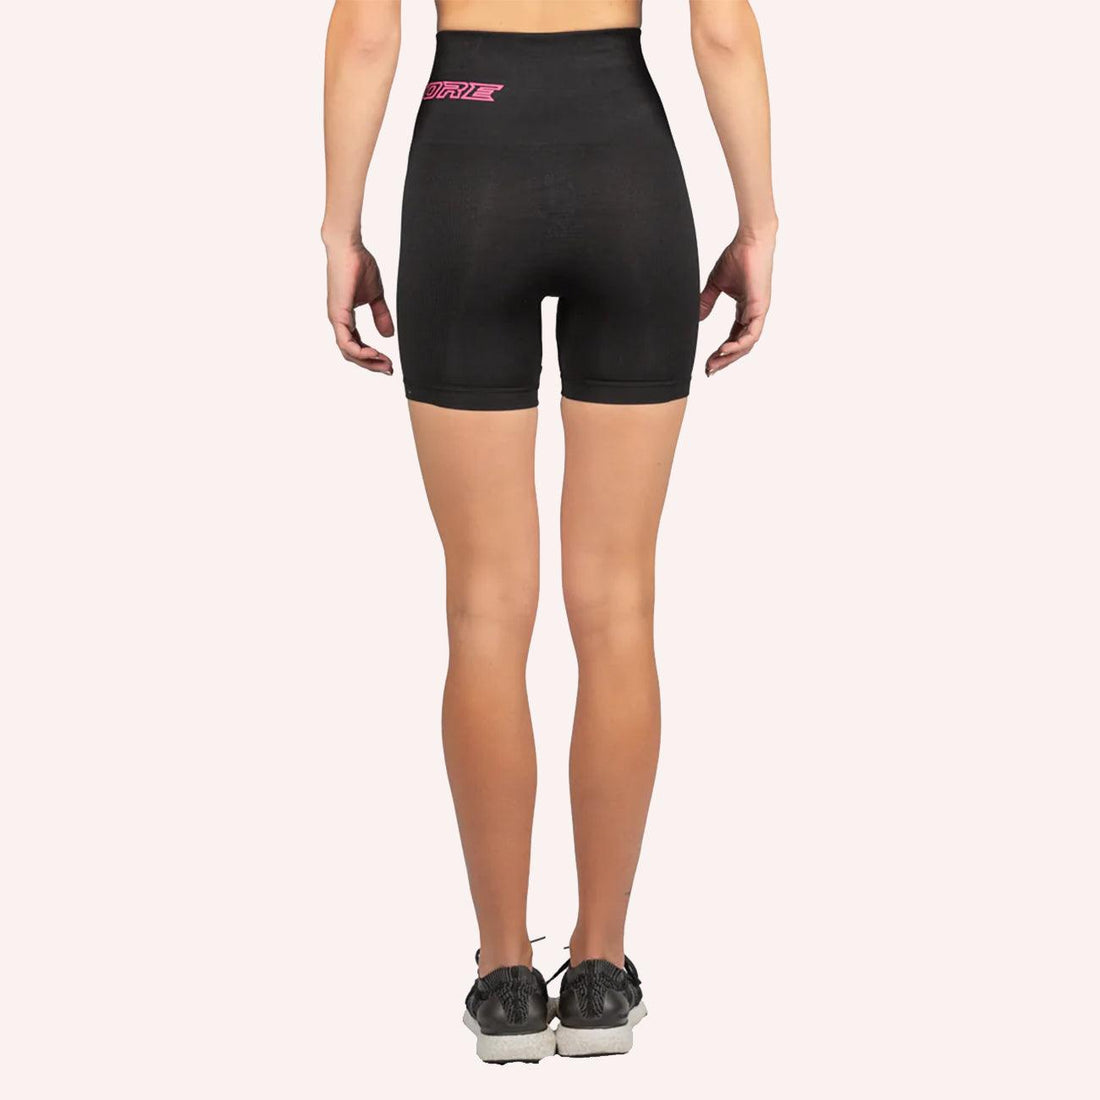 Injury Recovery & Postpartum Compression Shorts – The Memo